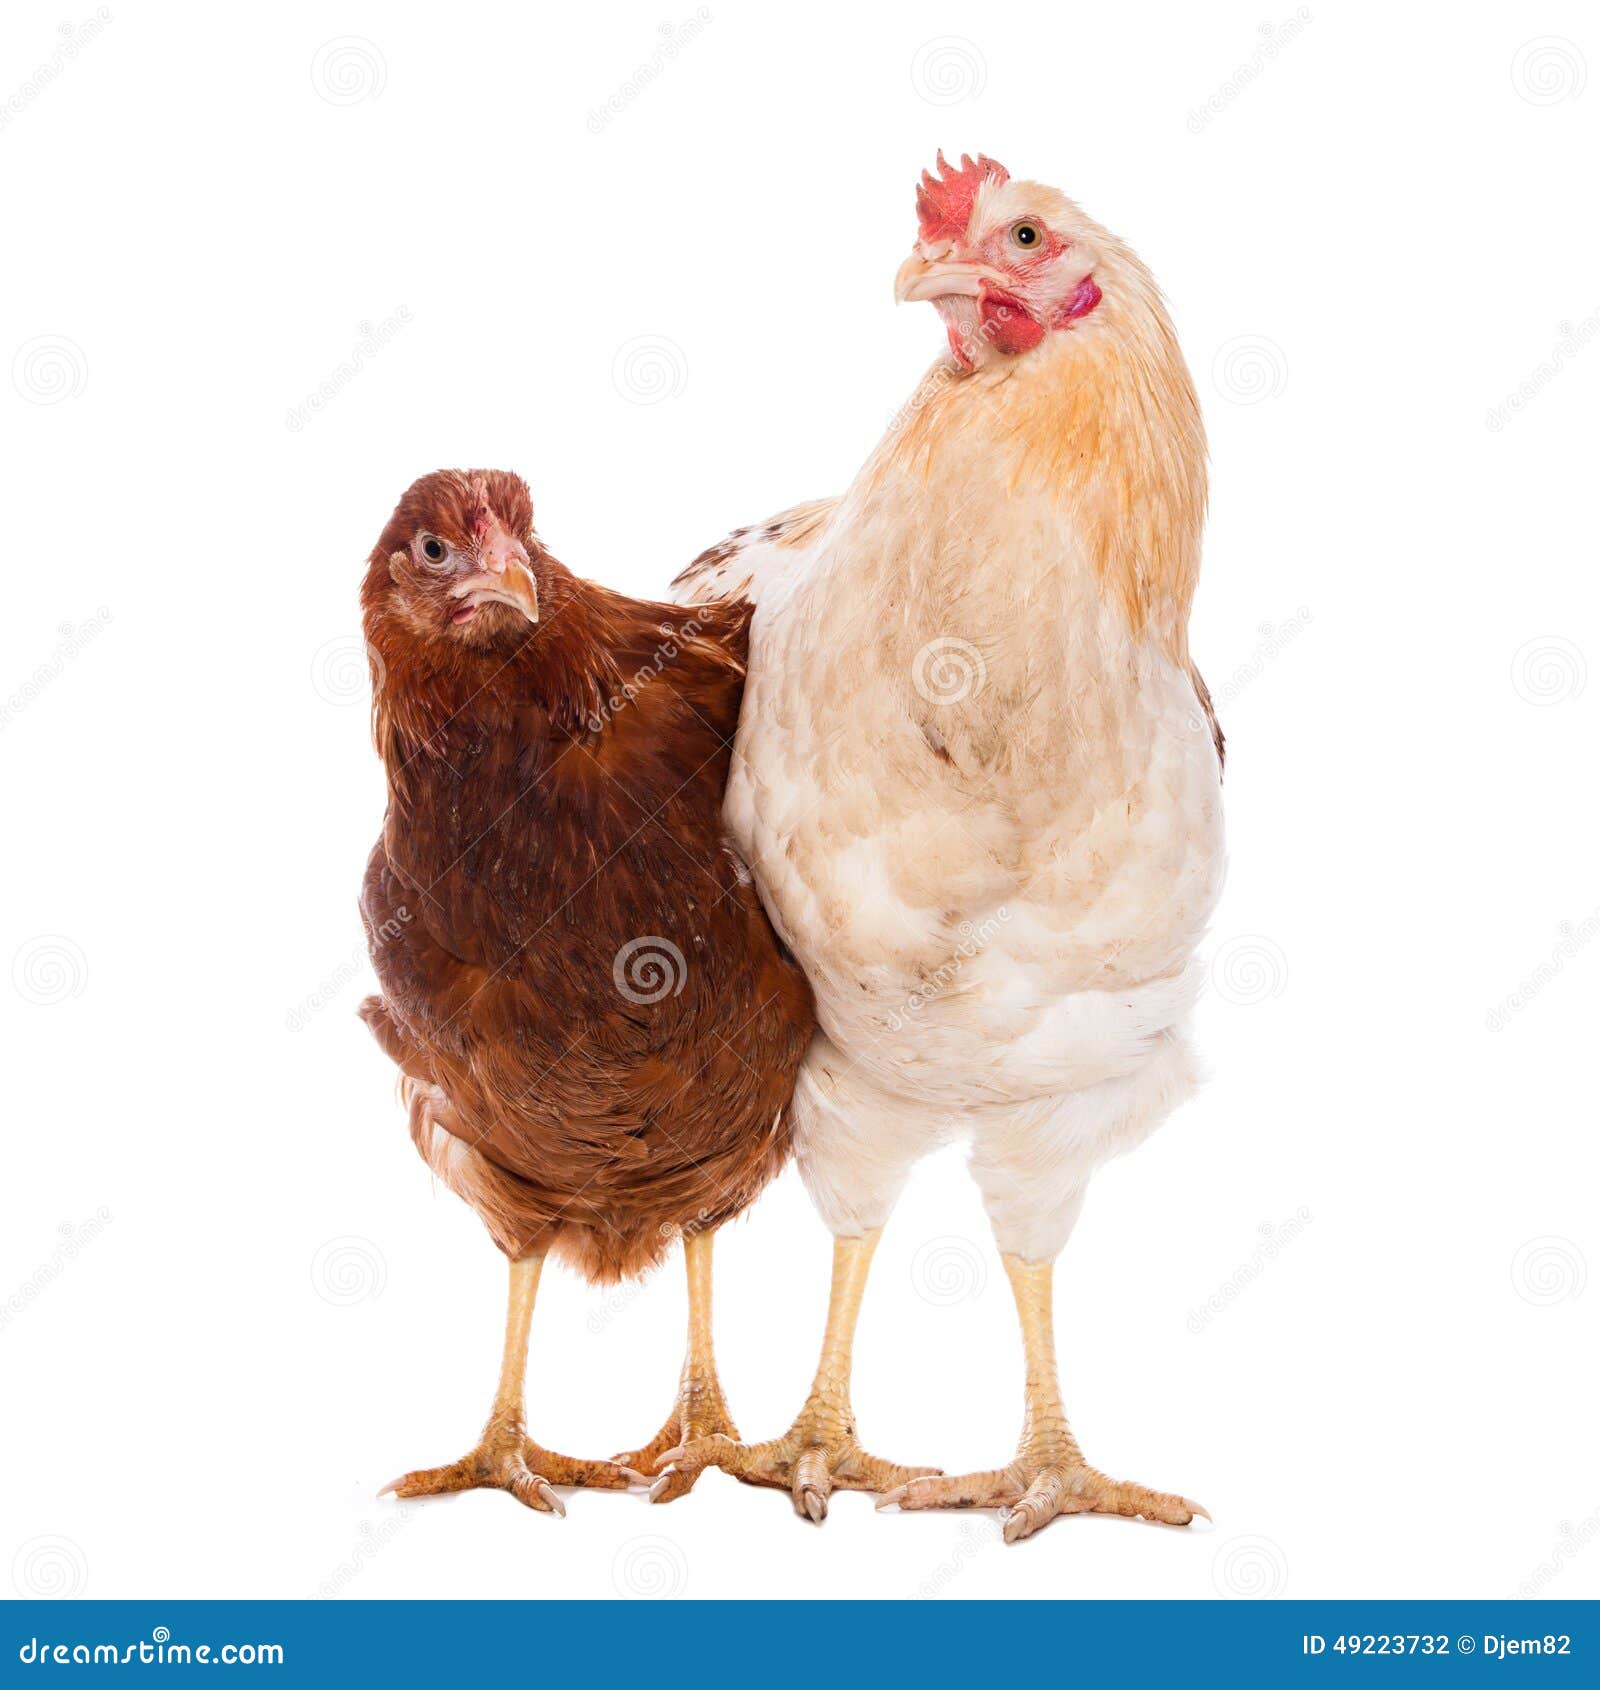 Rooster and chicken stock photo. Image of real, rooster - 49223732